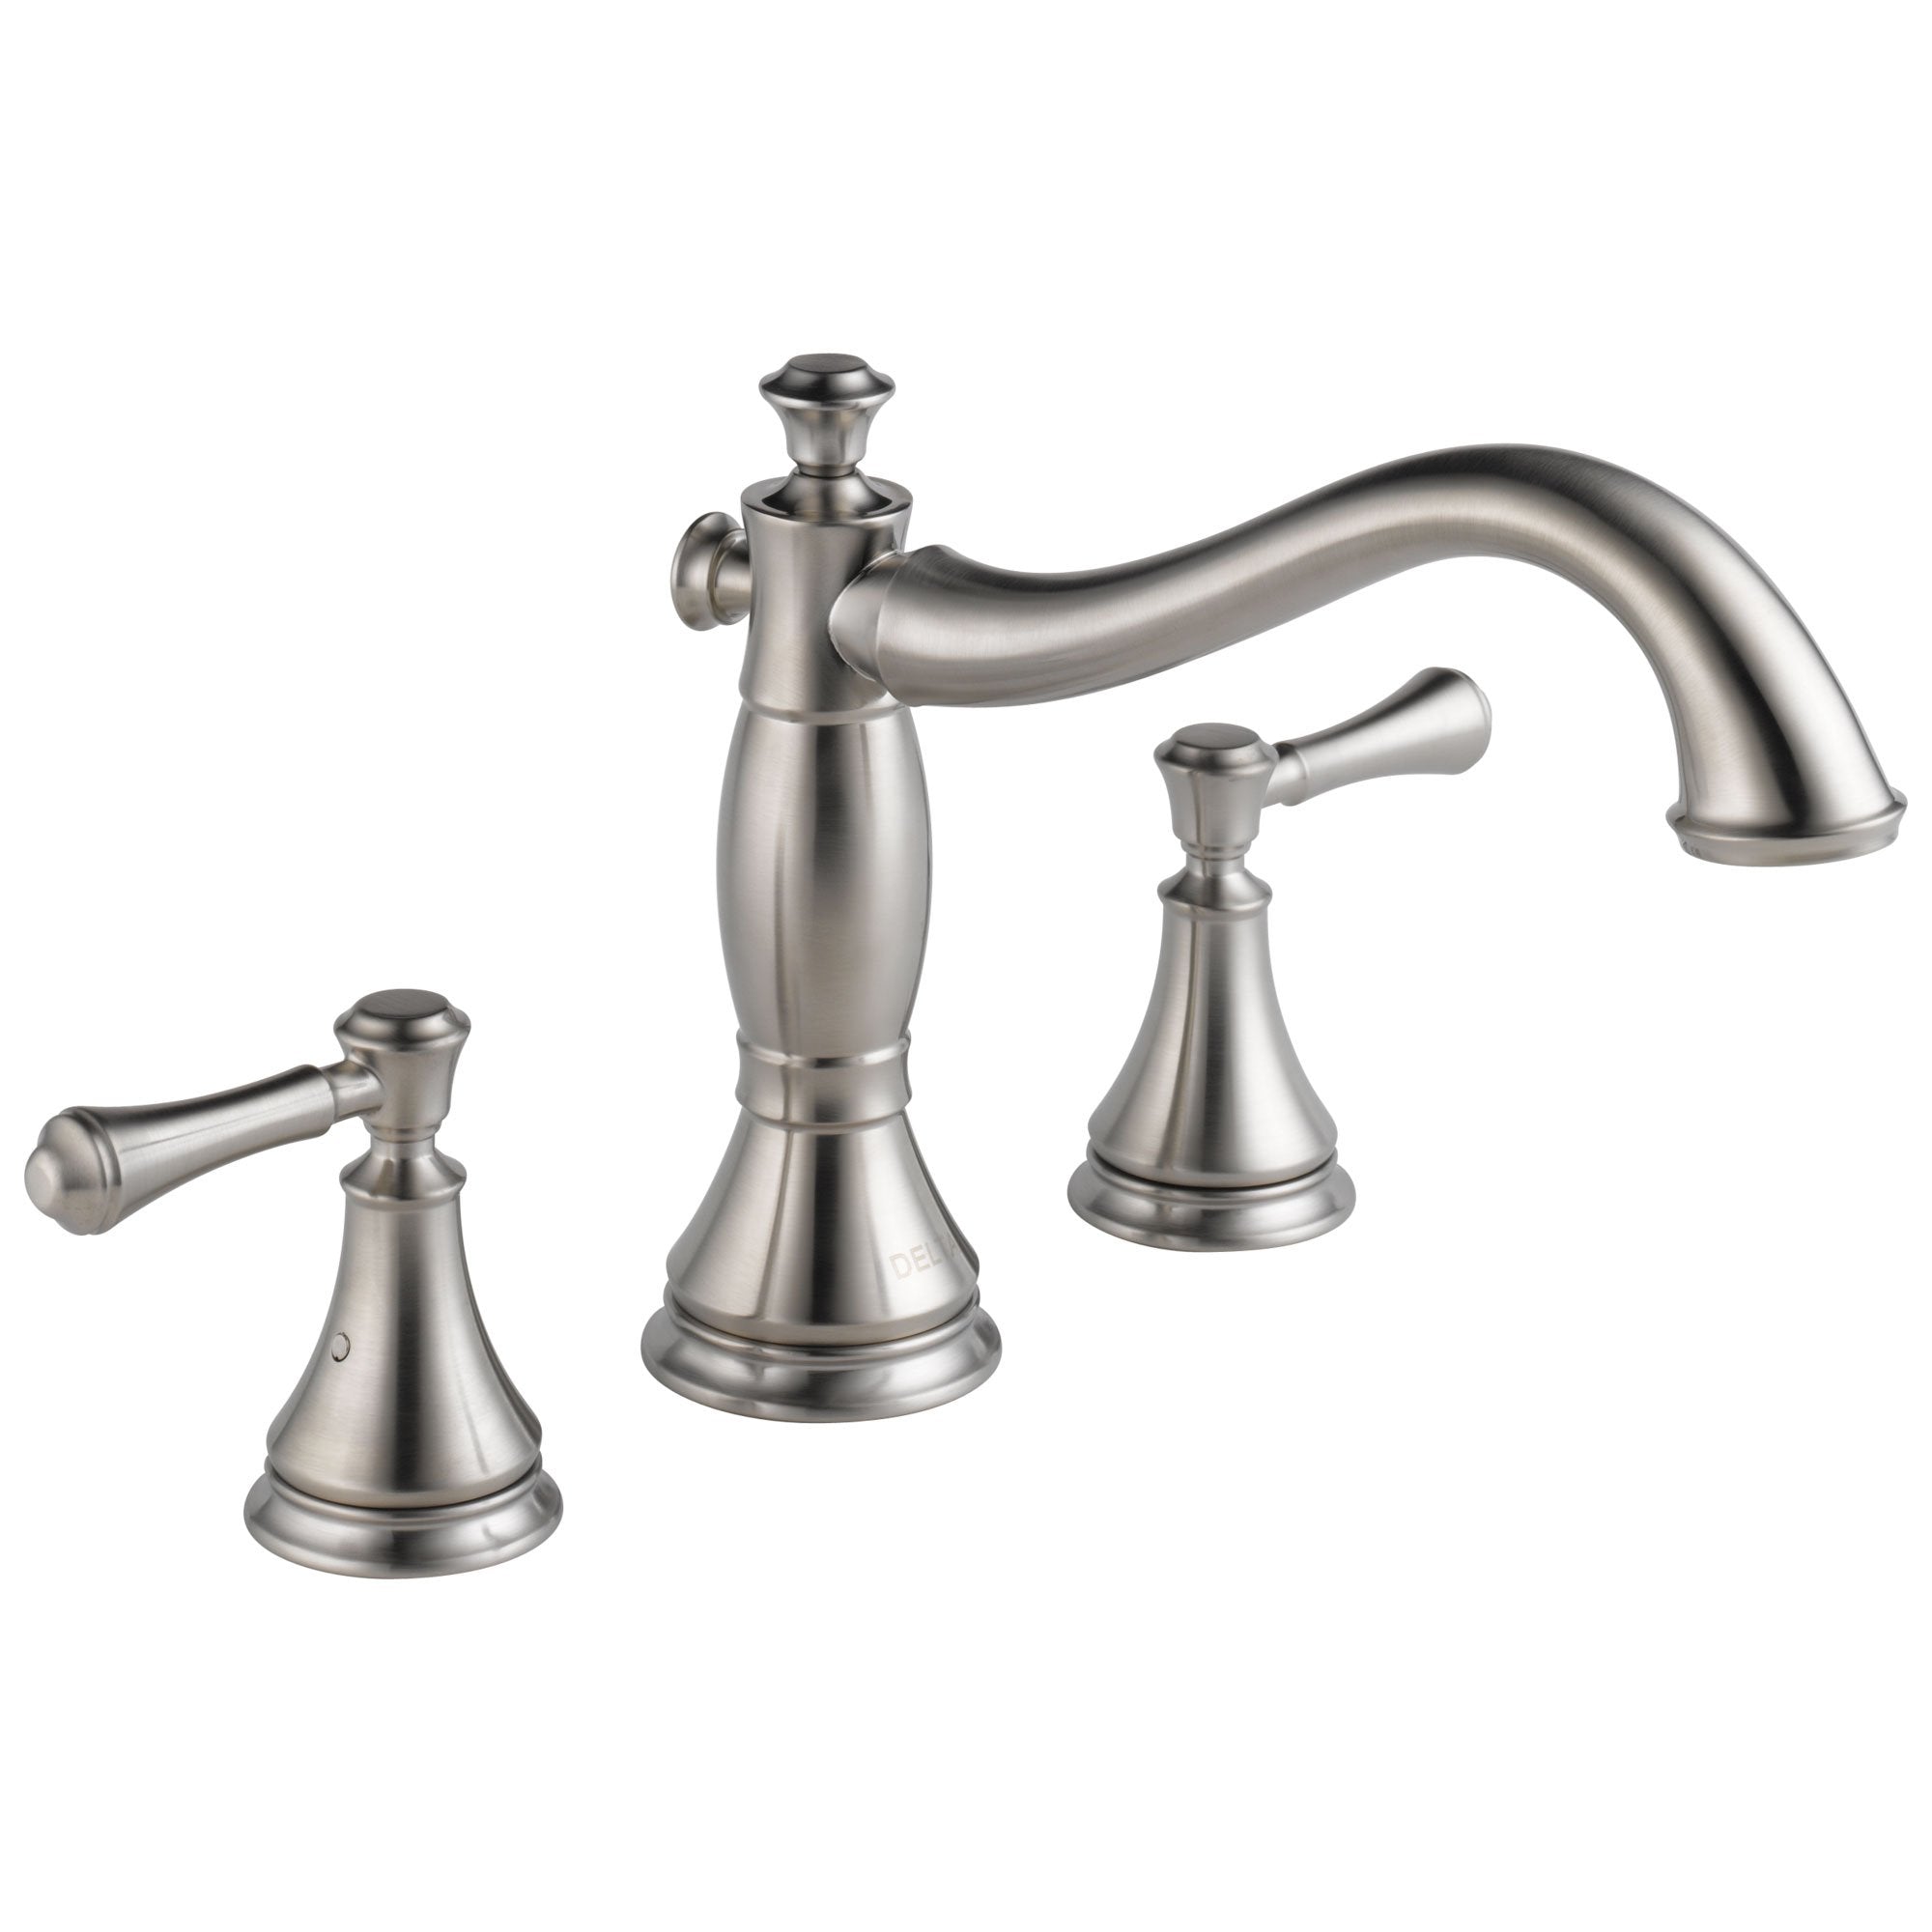 Delta Cassidy Collection Stainless Steel Finish Roman Tub Filler Faucet COMPLETE ITEM Includes (2) Lever Handles and Rough-in Valve D1428V